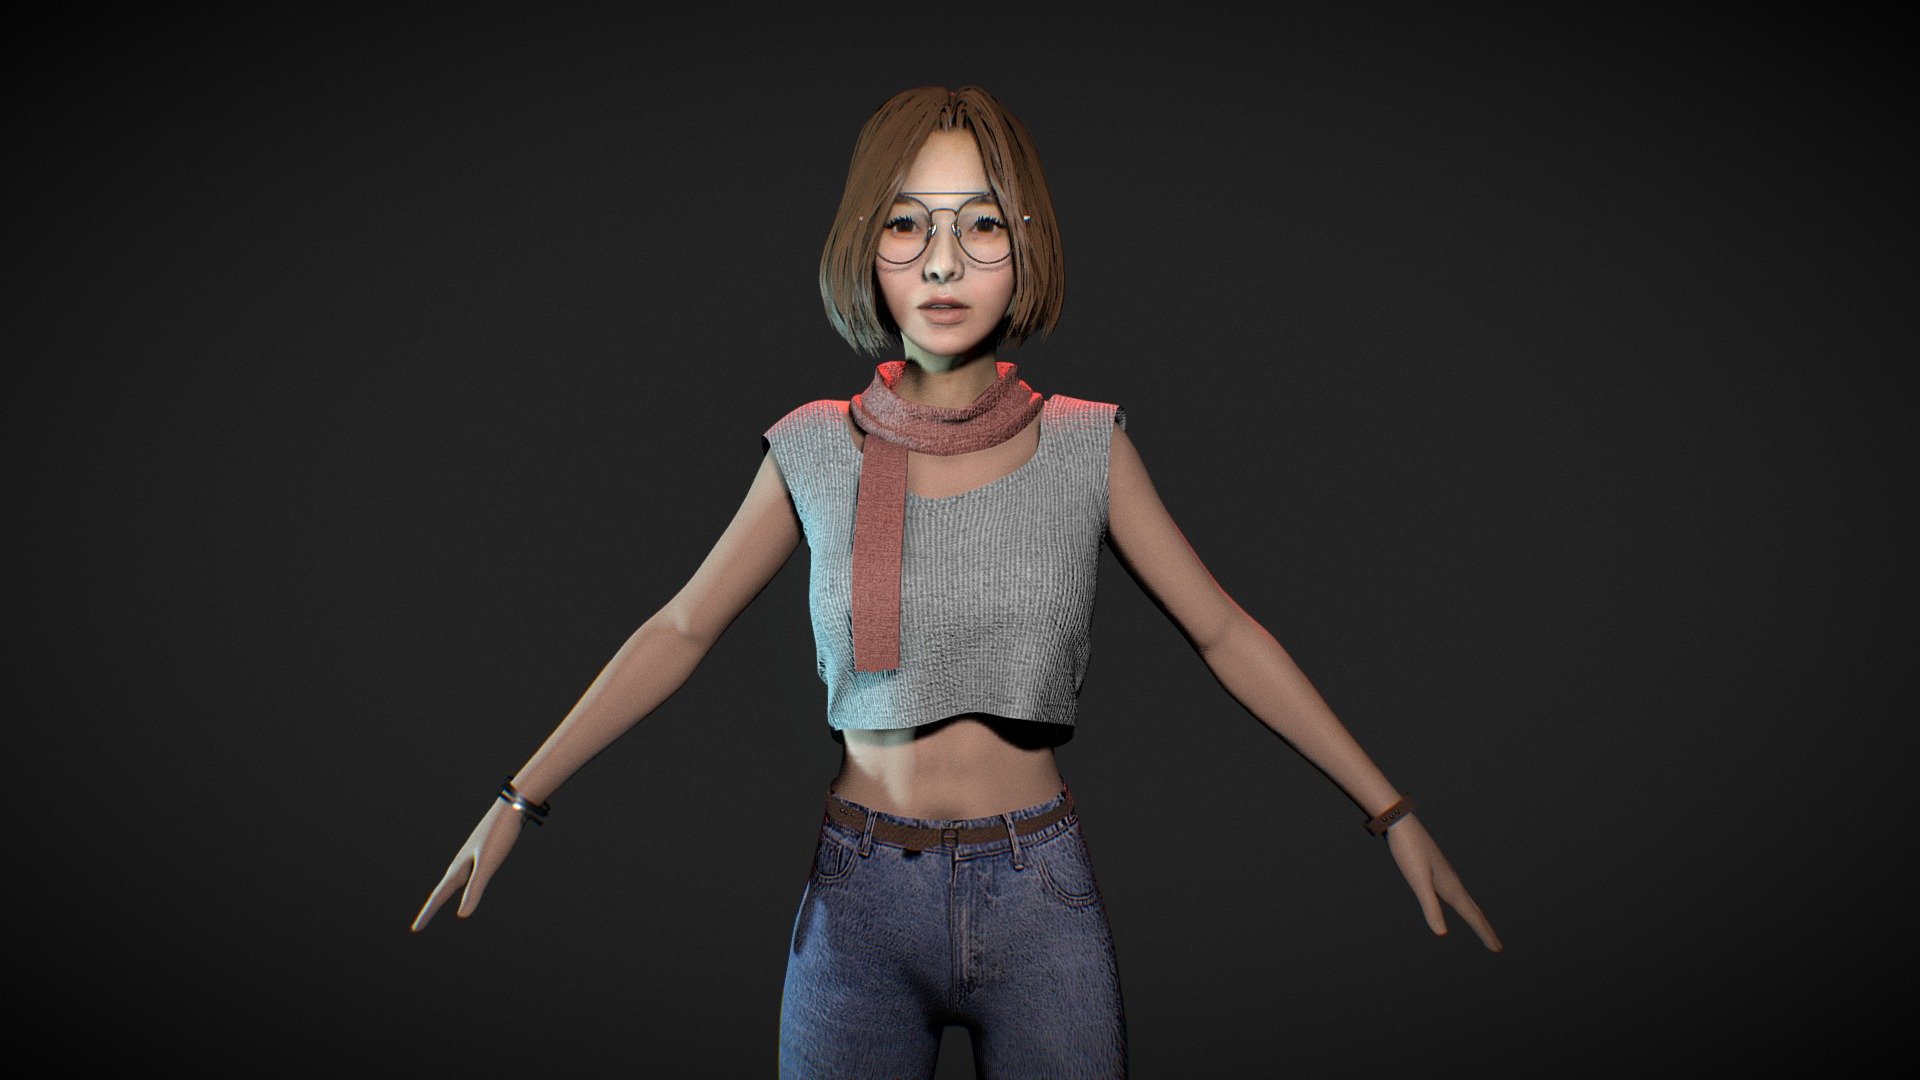 Here is a model I did from imagination in Blender. I got inspired on the slasher movies survivors and decided to do my own. I did character last year.
This model is not rigged.
New: Updated the textures and UV mapping 3d model